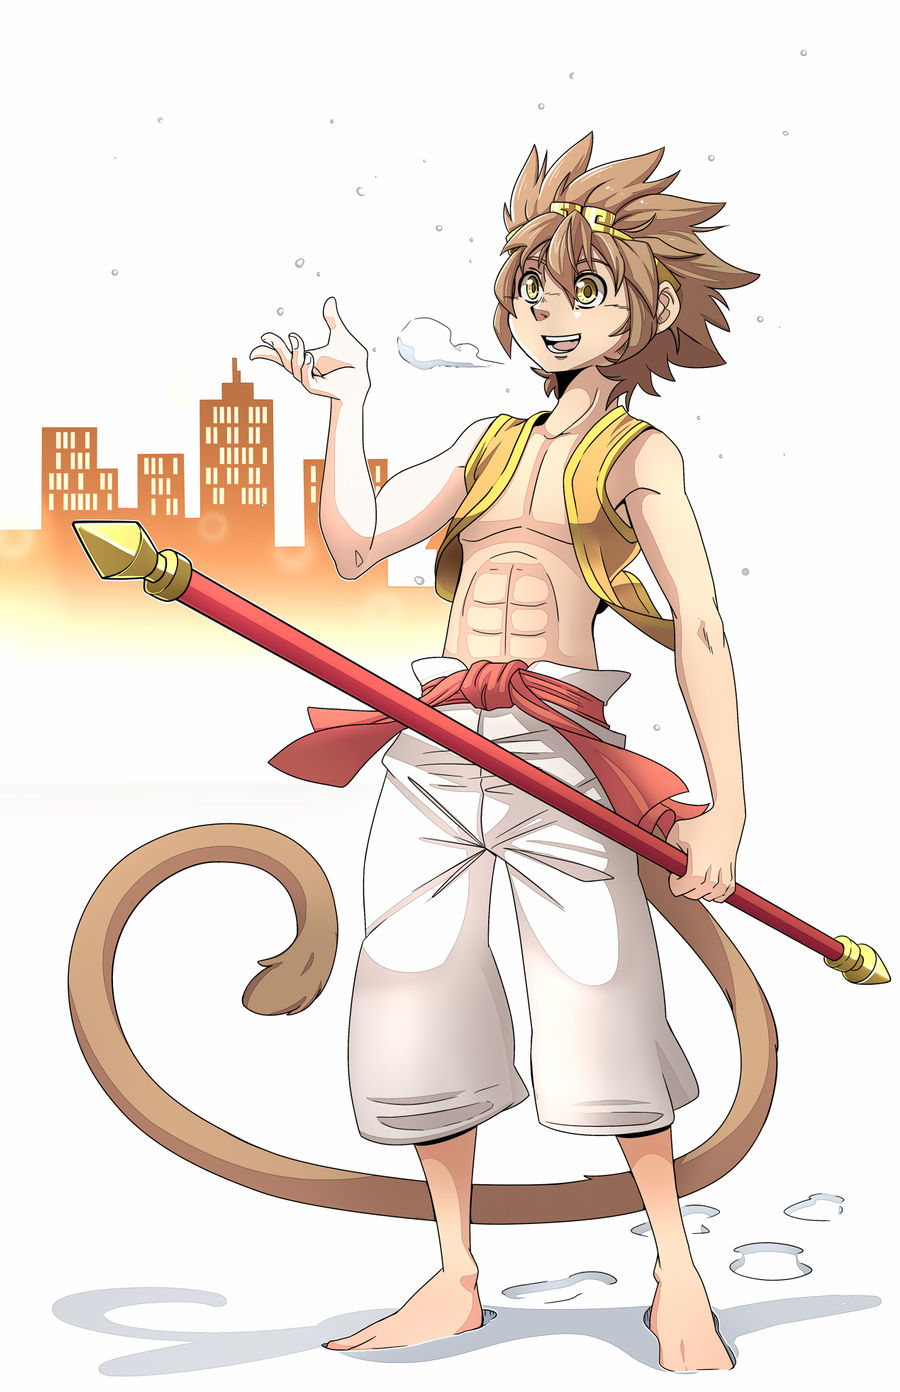 Sun Wukong In The Snow By Laharl234 On Deviantart